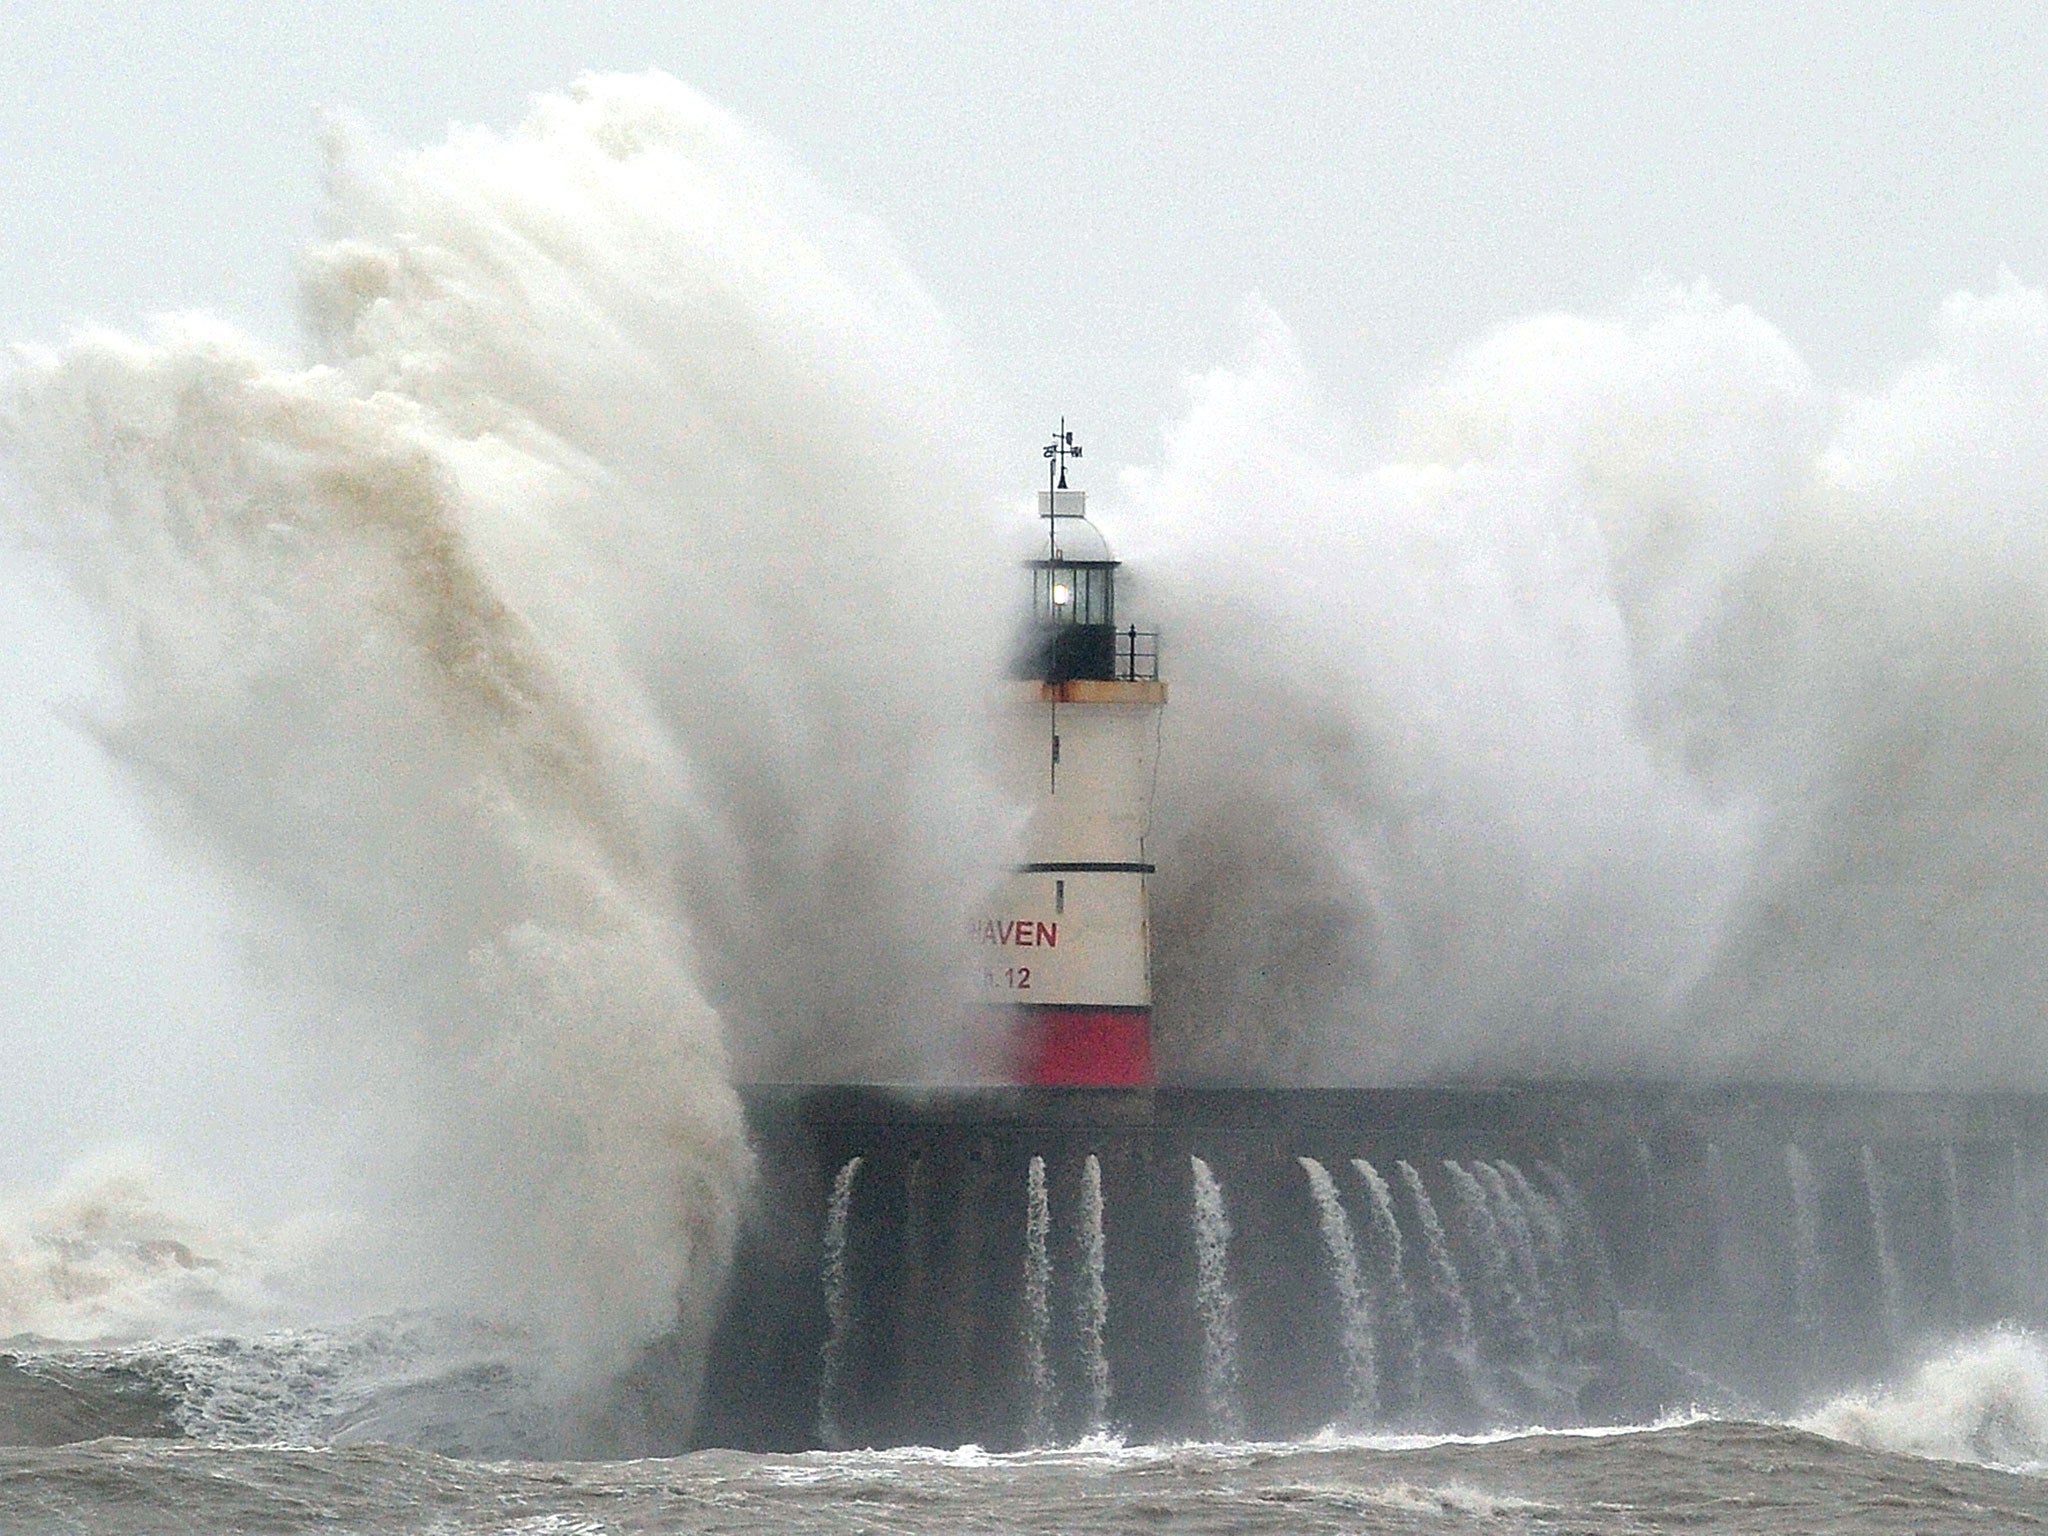 Newhaven Lighthouse is battered by waves during stormy weather in Newhaven on the southern coast of England